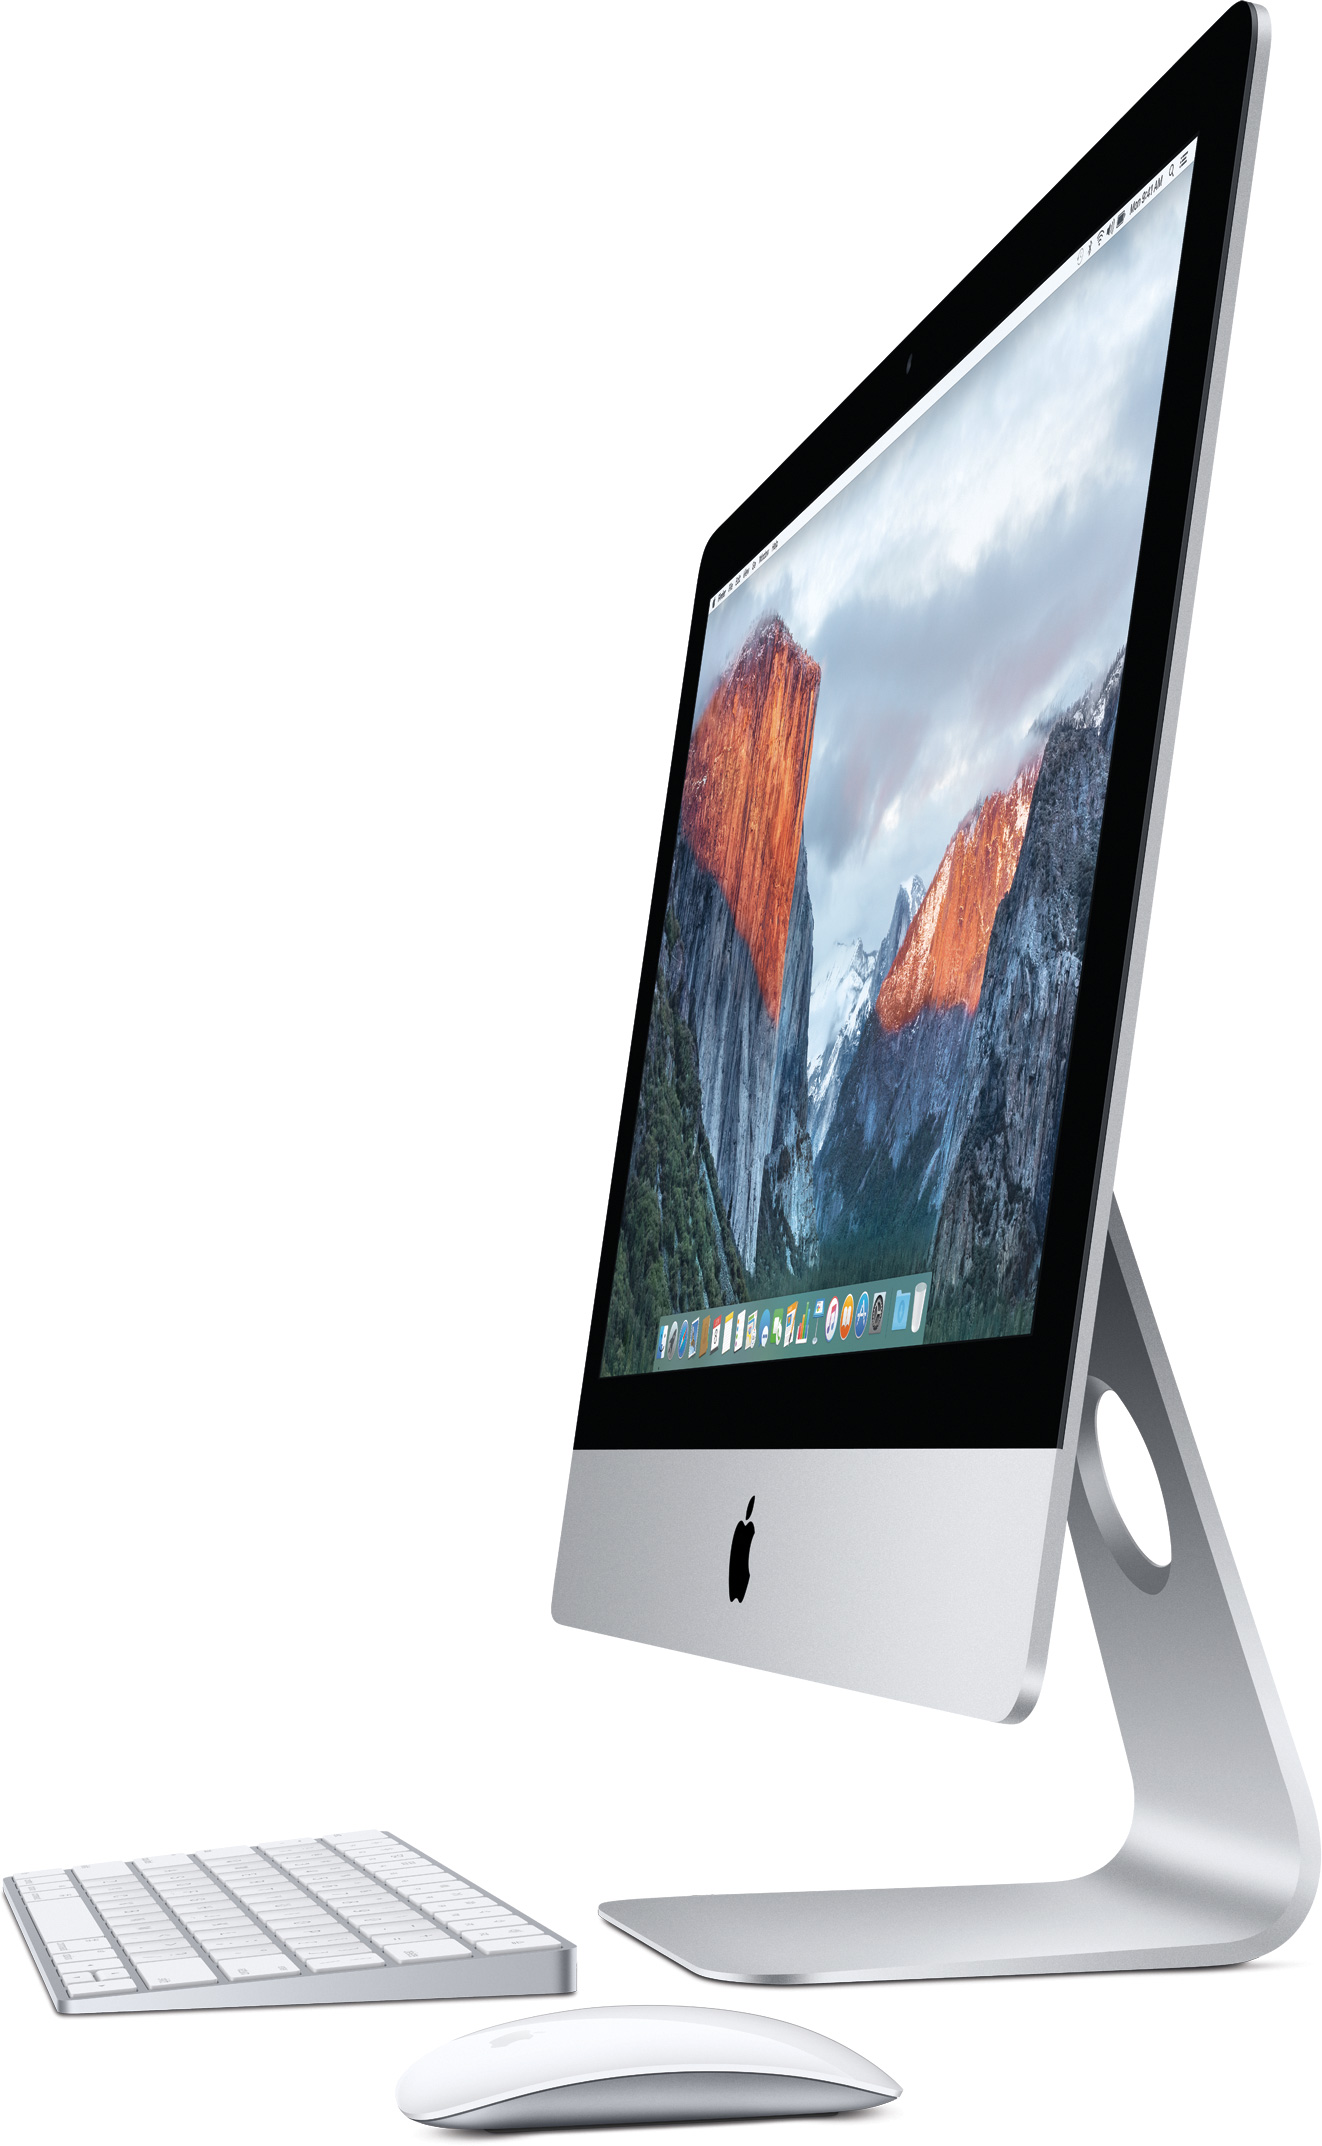 21.5-inch iMac with peripherals